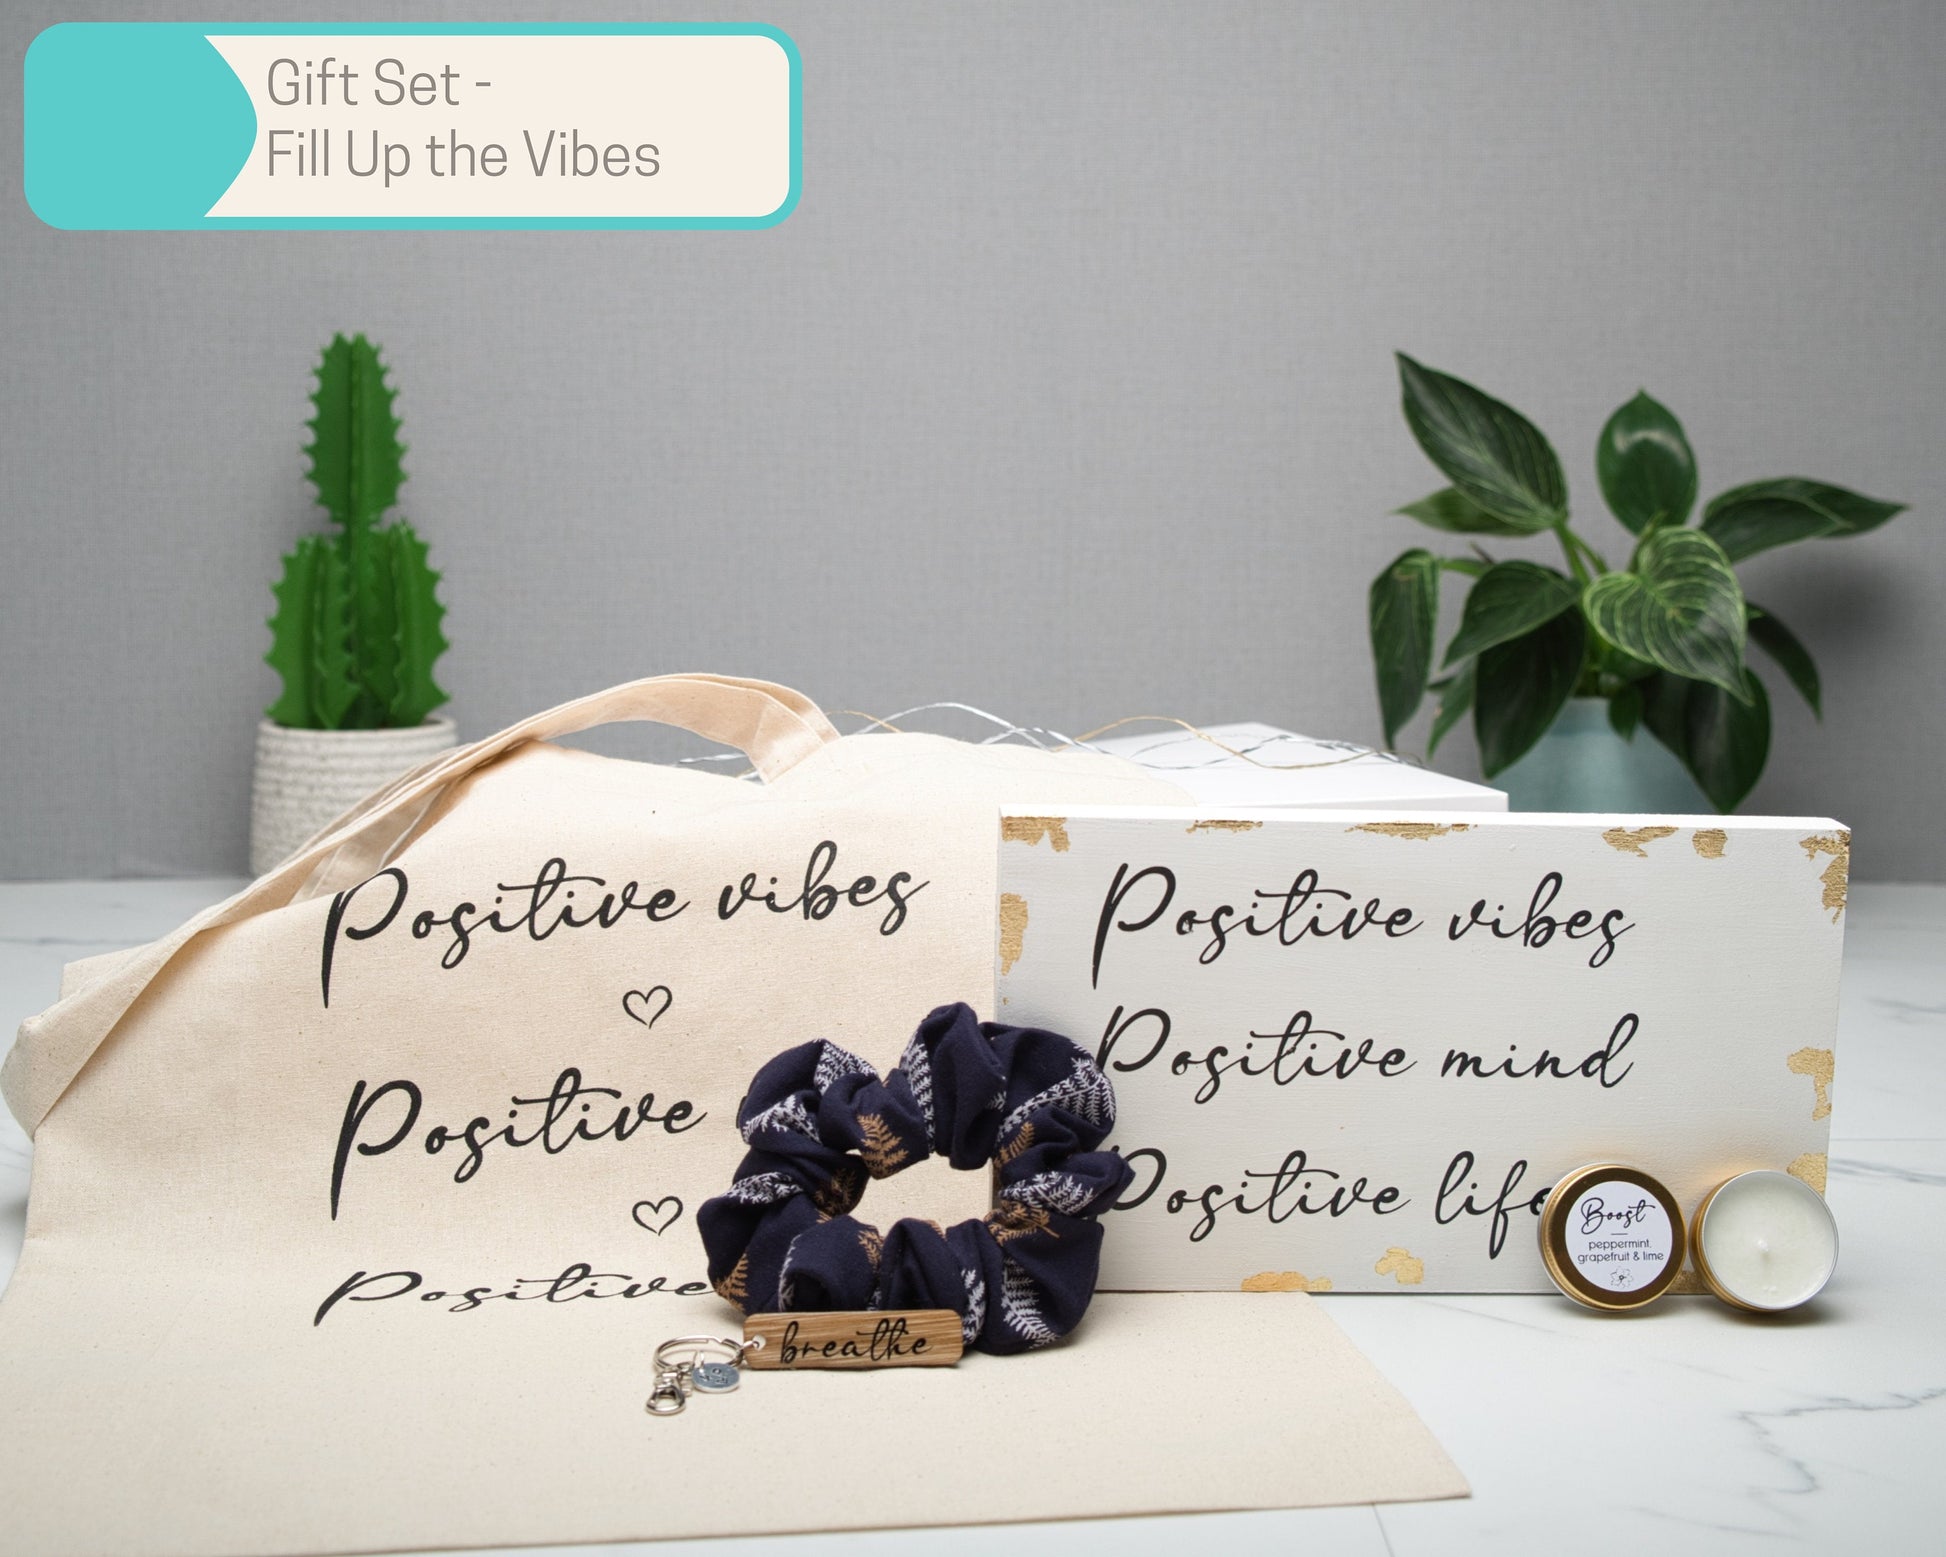 Wood Block Gift Sets Positive Vibes Mind Life in Multiple Sizes, Tote Bag, Scrunchie, candle, 500ml glass tumbler, keyring, Home Decor Gift